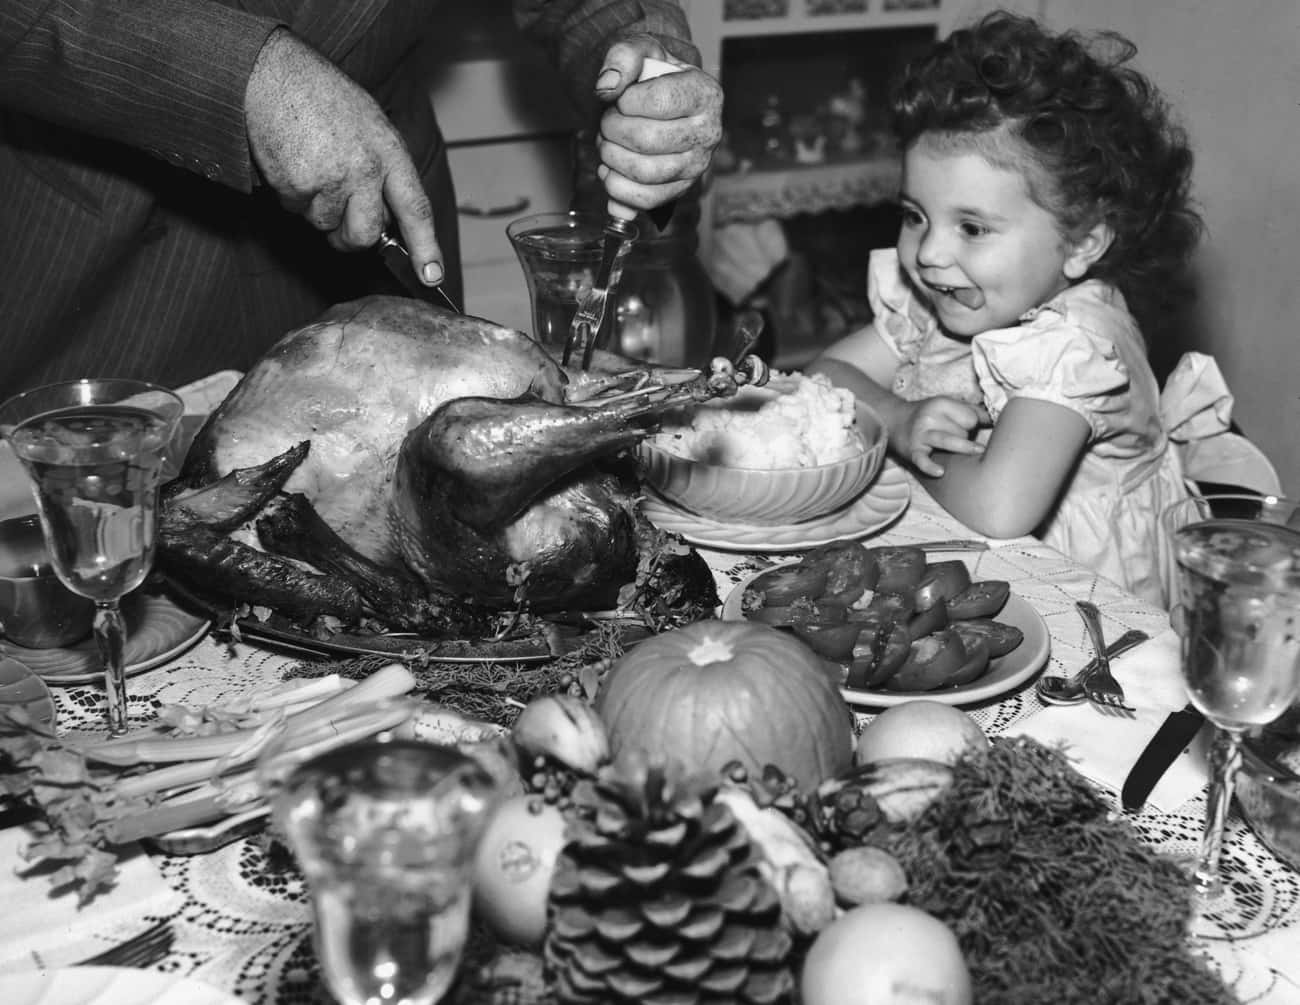 A Young Child Excited For Some Turkey - 1945